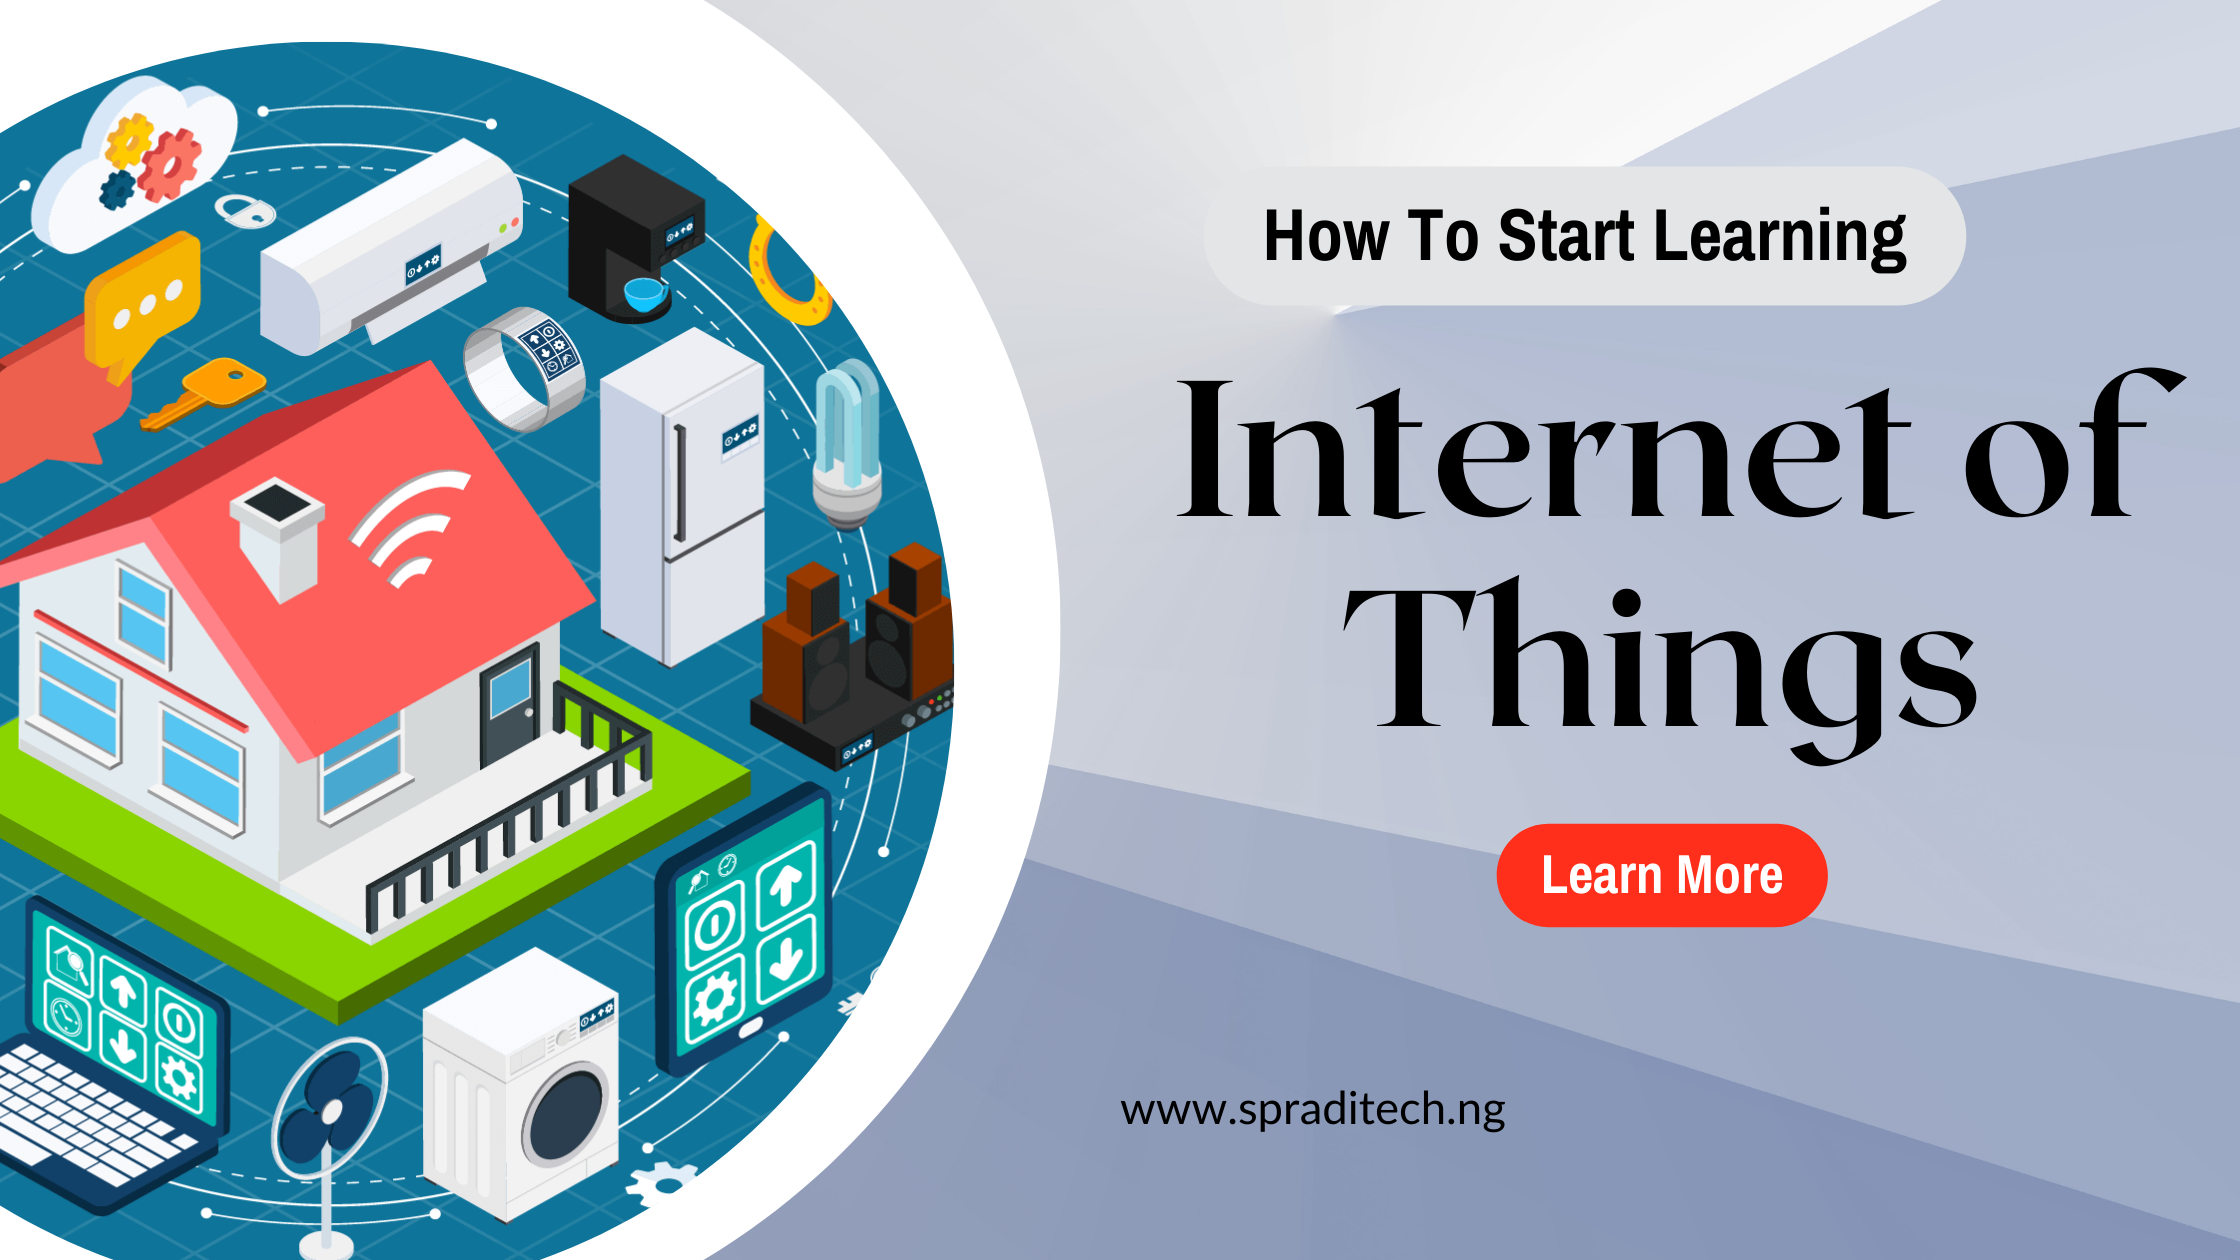 How to Start Learning Internet of Things